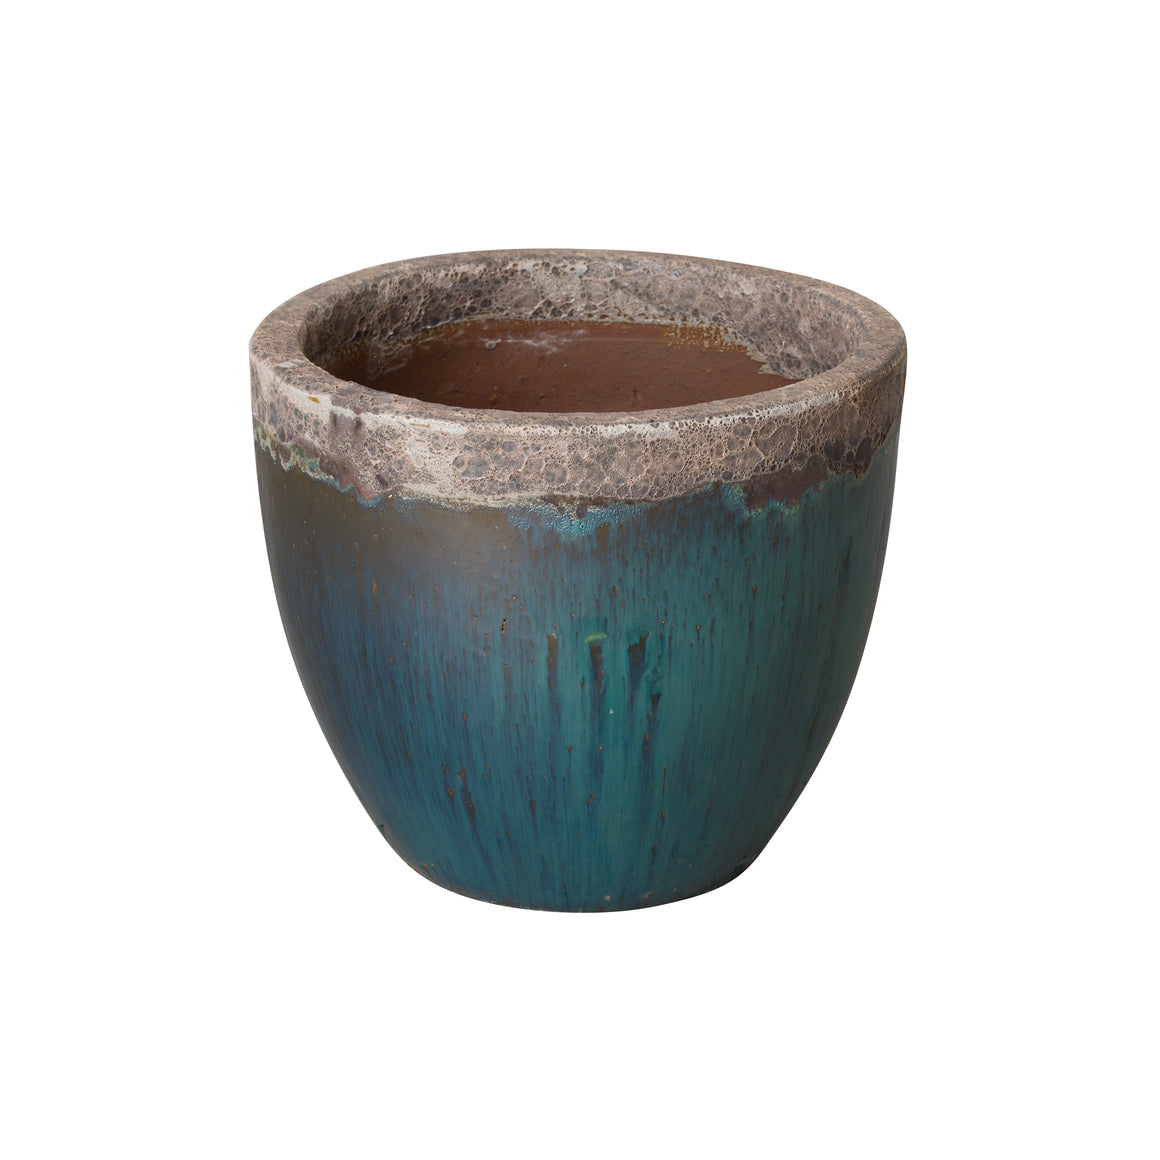 Round Ceramic Planter with a Reef/Teal Glaze